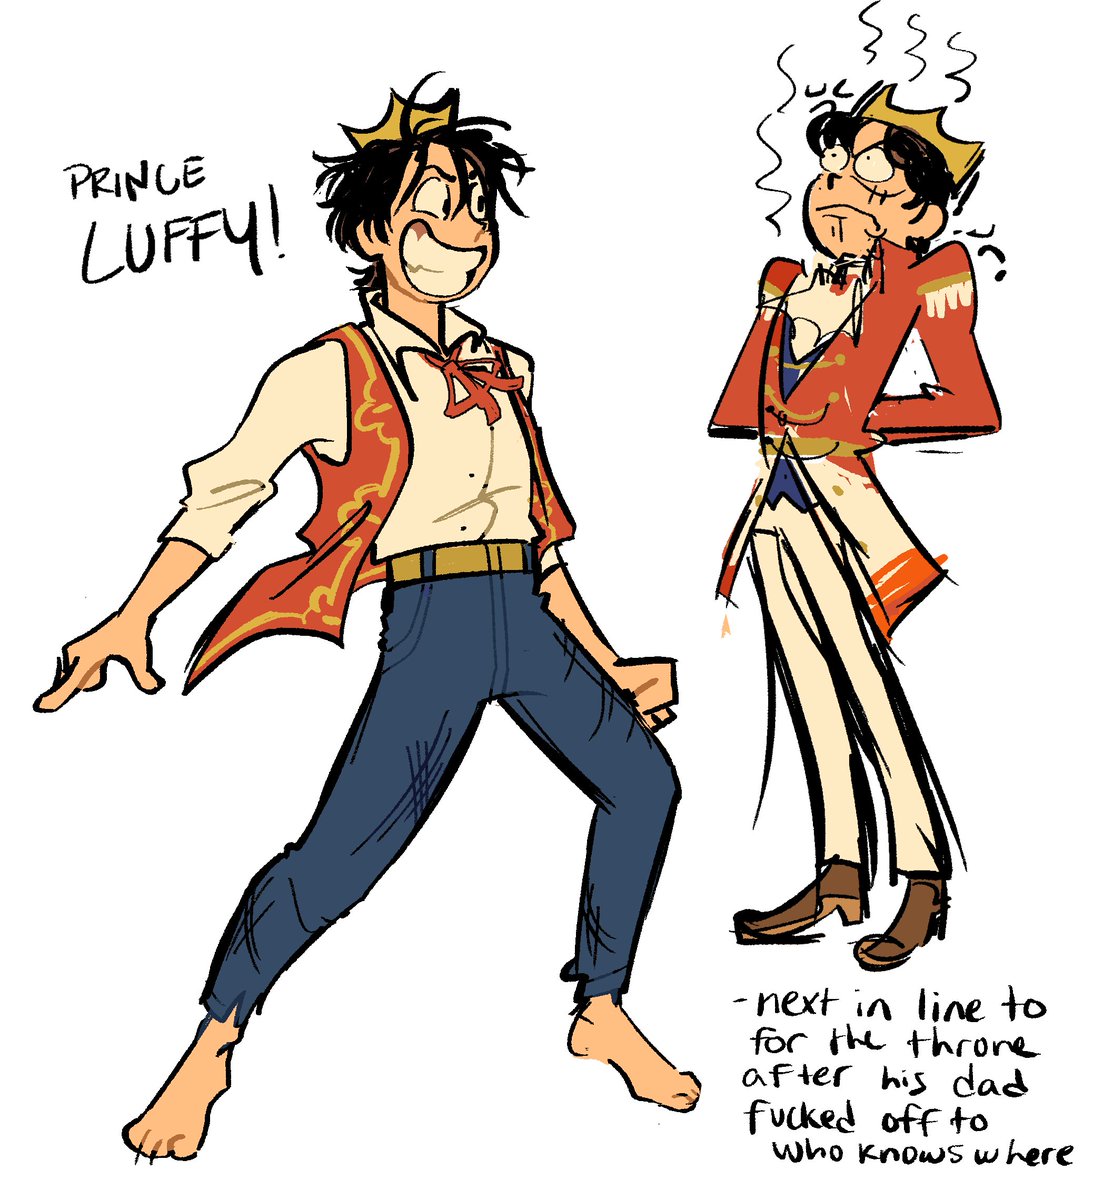 came up with a few ideas for a silly royal au 👑 